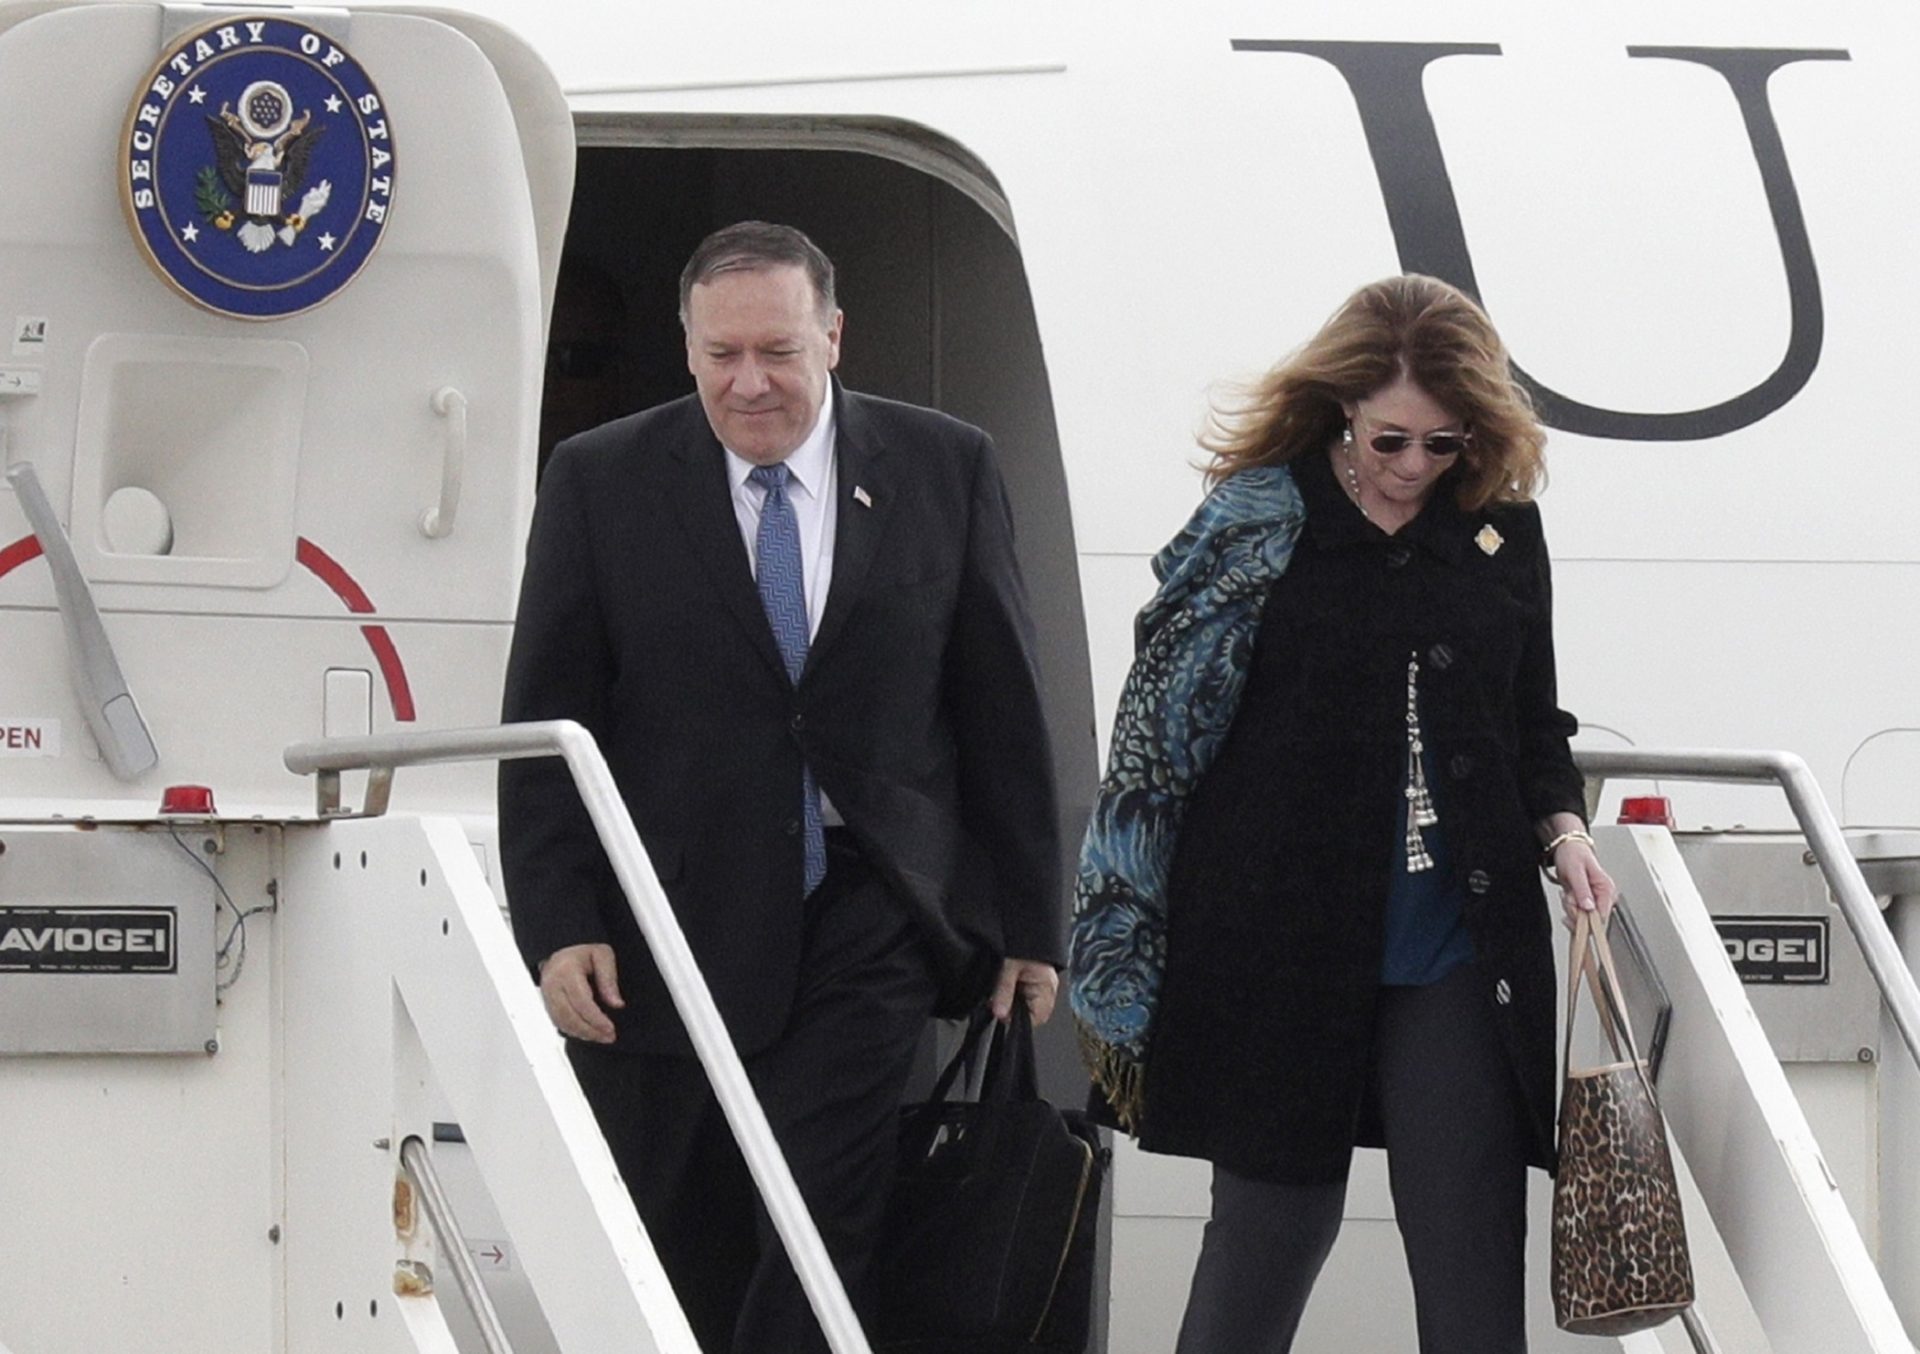 United States Secretary of State Mike Pompeo and his wife Susan Pompeo walk out of the plane upon arriving at Ciampino military airport, in Rome, Tuesday, Oct. 1, 2019. Pompeo is in Italy for a 3-day trip.